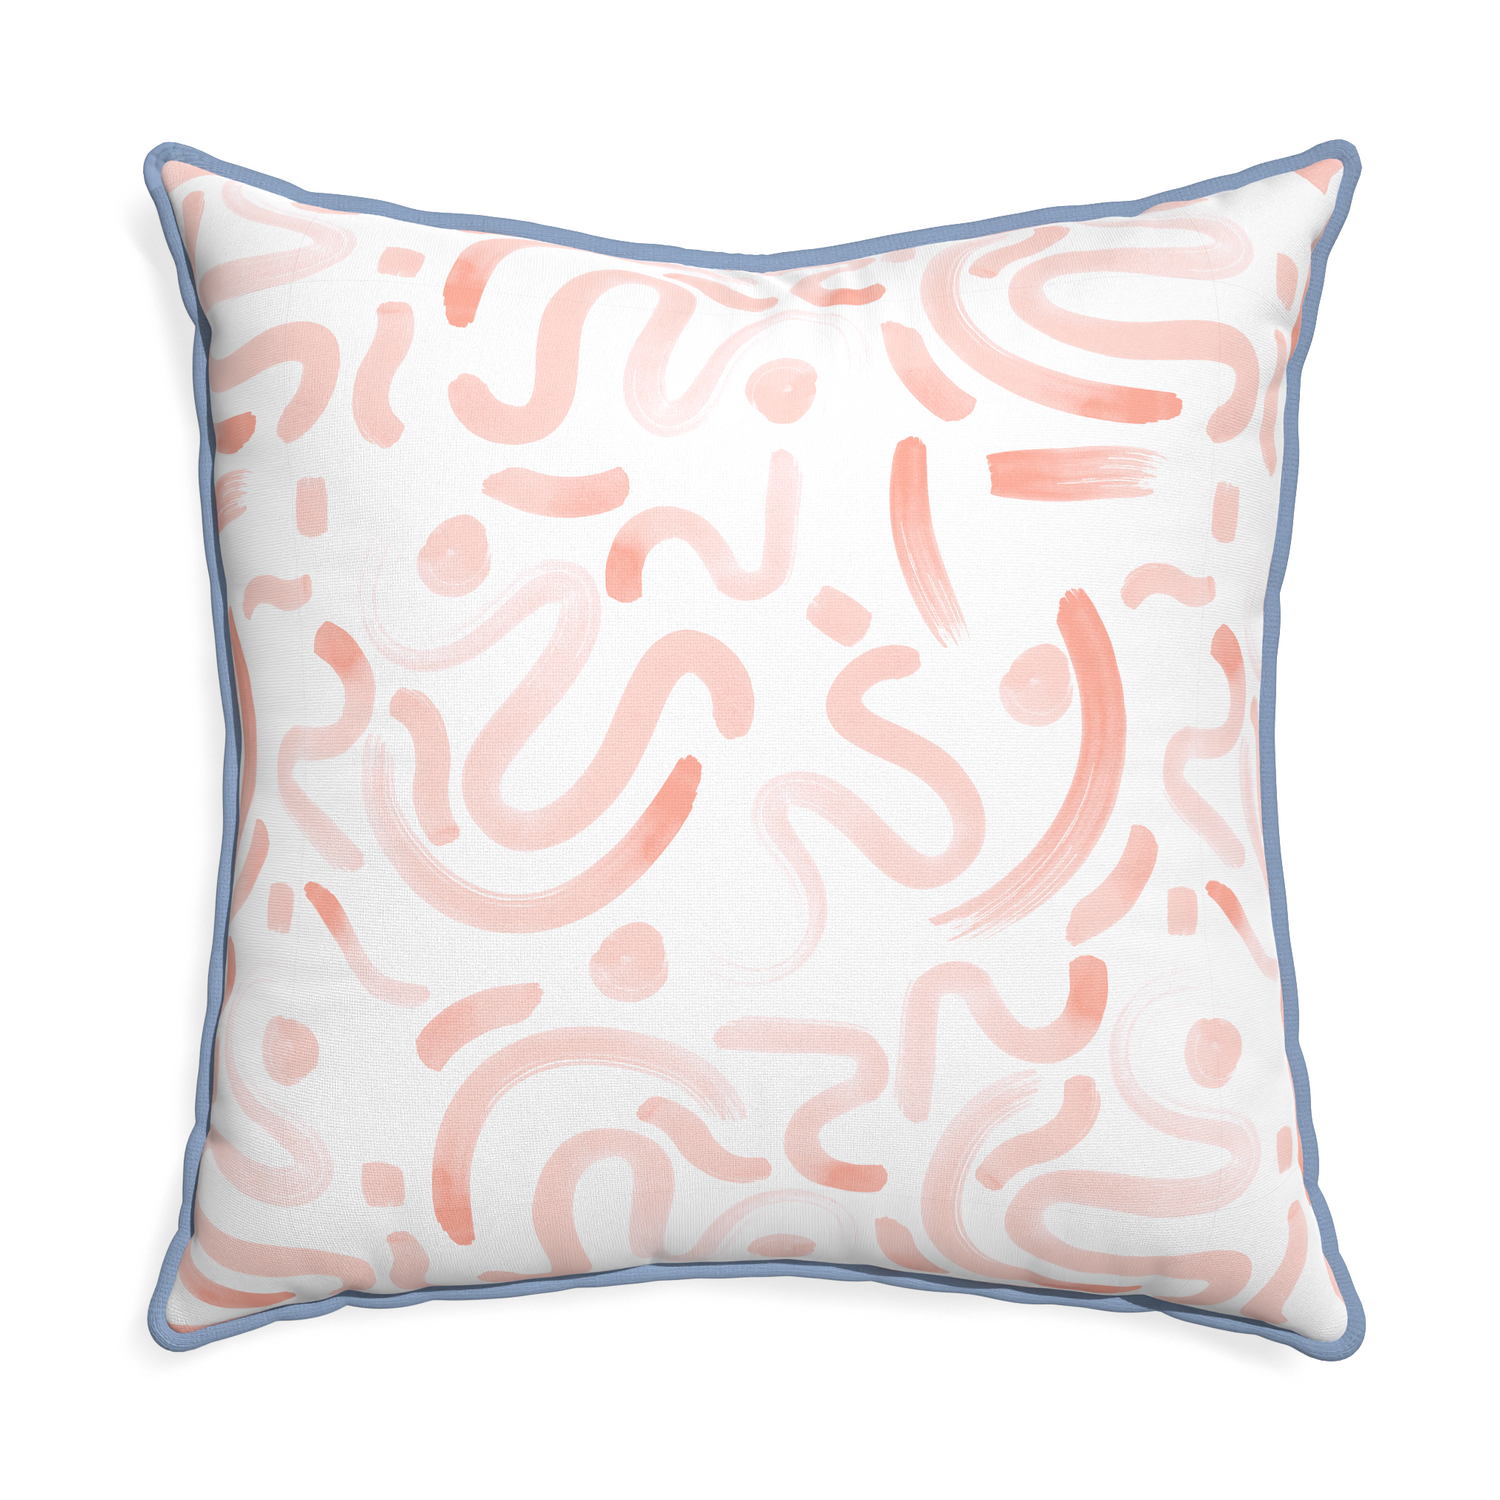 Euro-sham hockney pink custom pillow with sky piping on white background